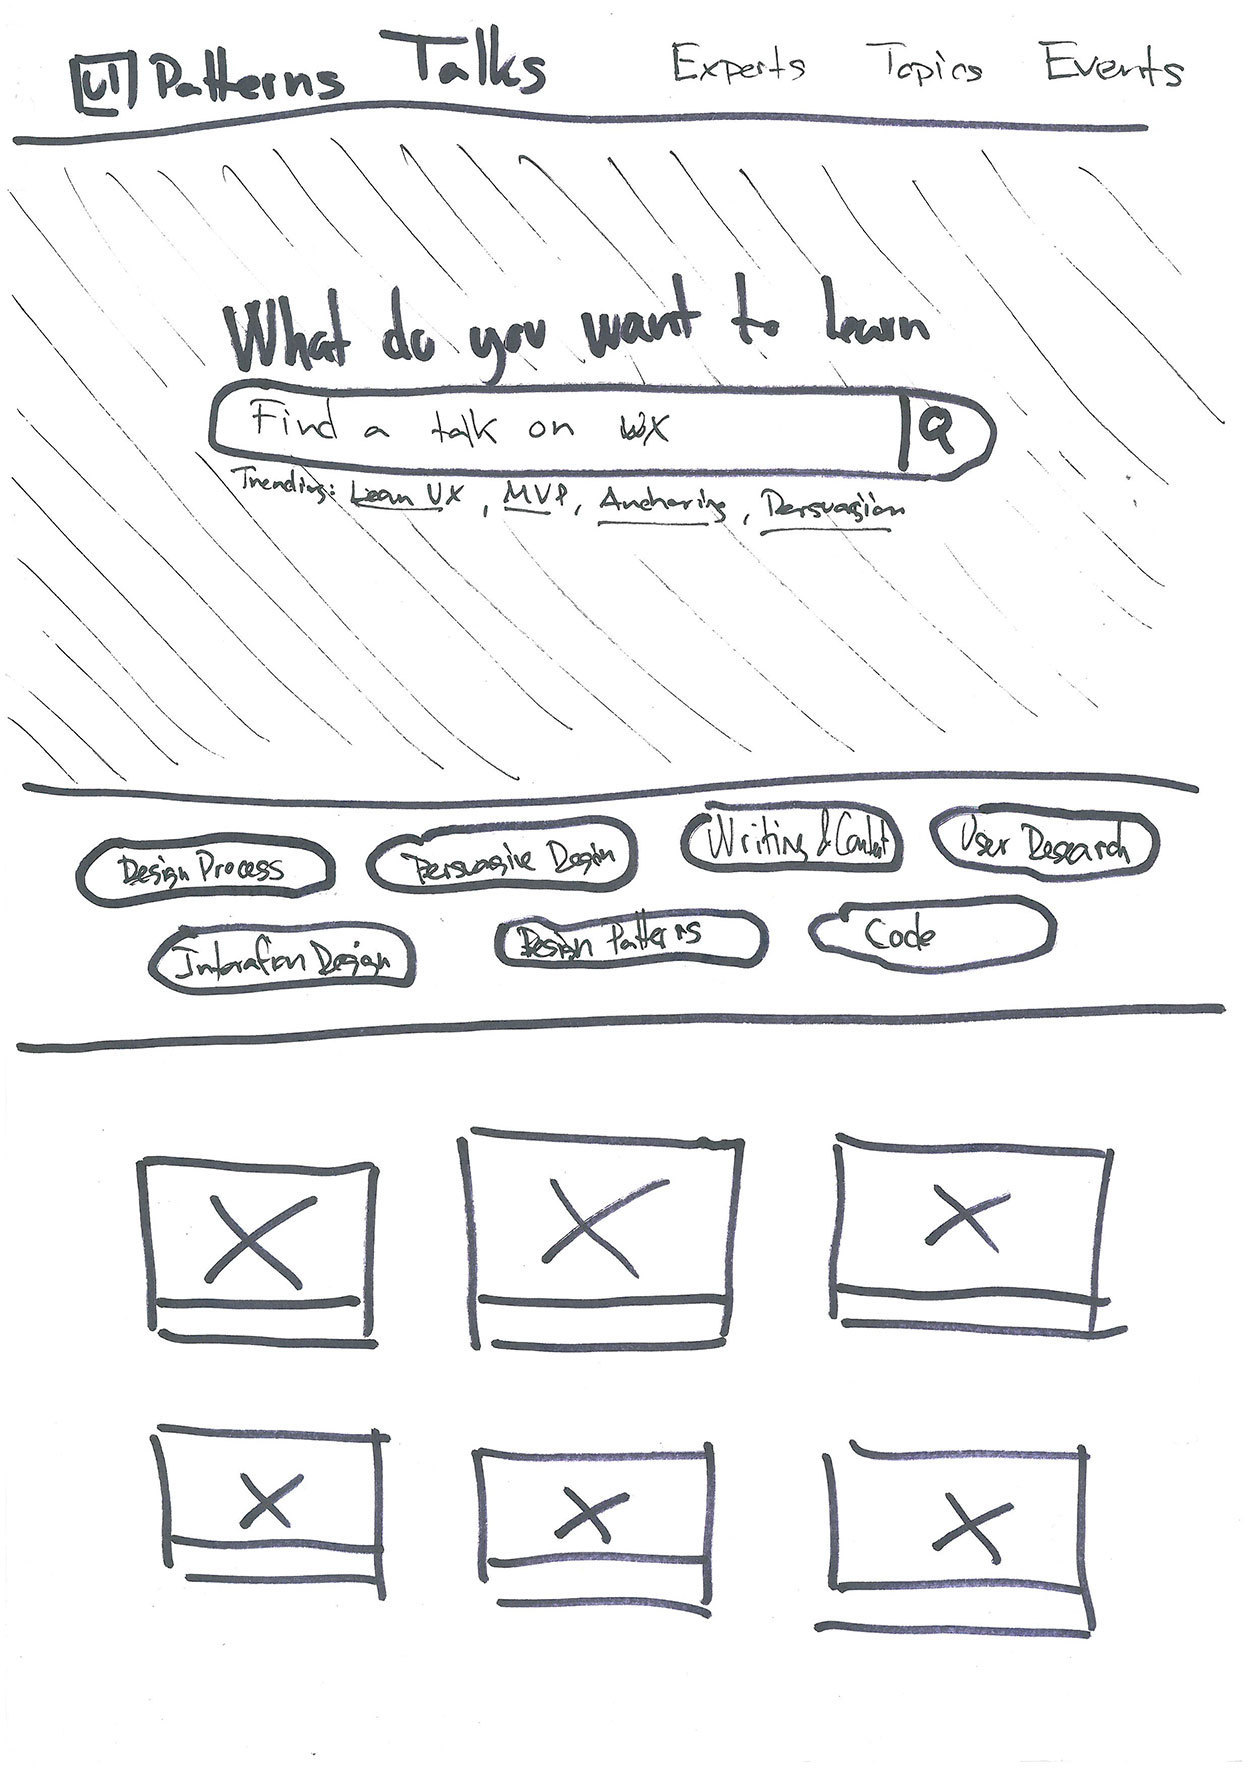 The very first paper sketch of the front page of UI Talks.